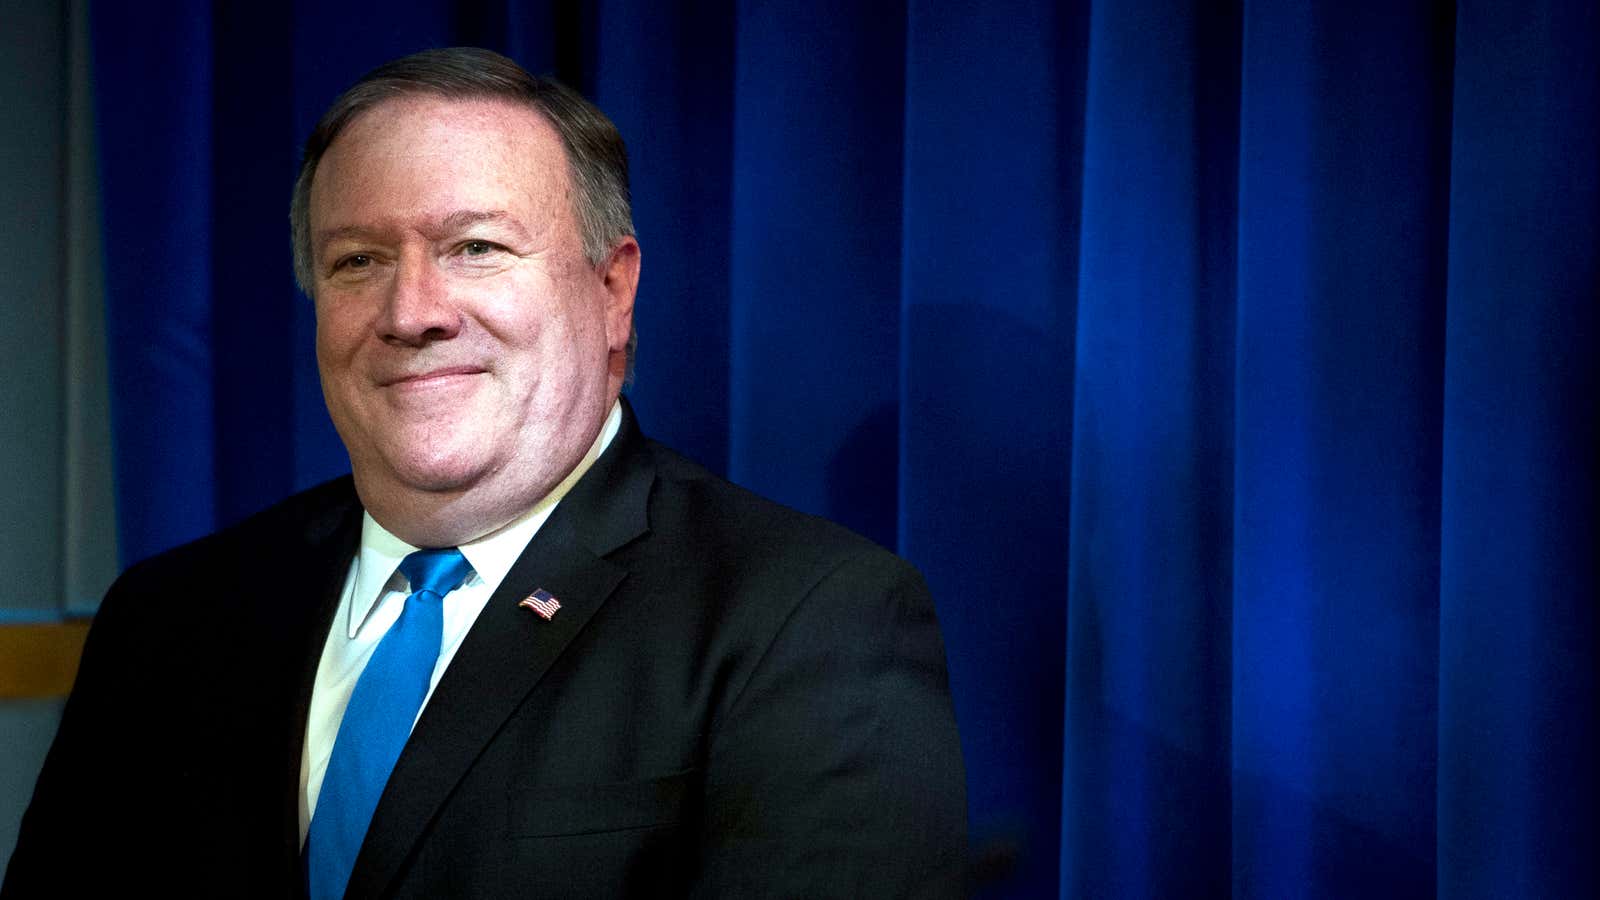 US Secretary of State Mike Pompeo has formed a task force to look into the incidents.